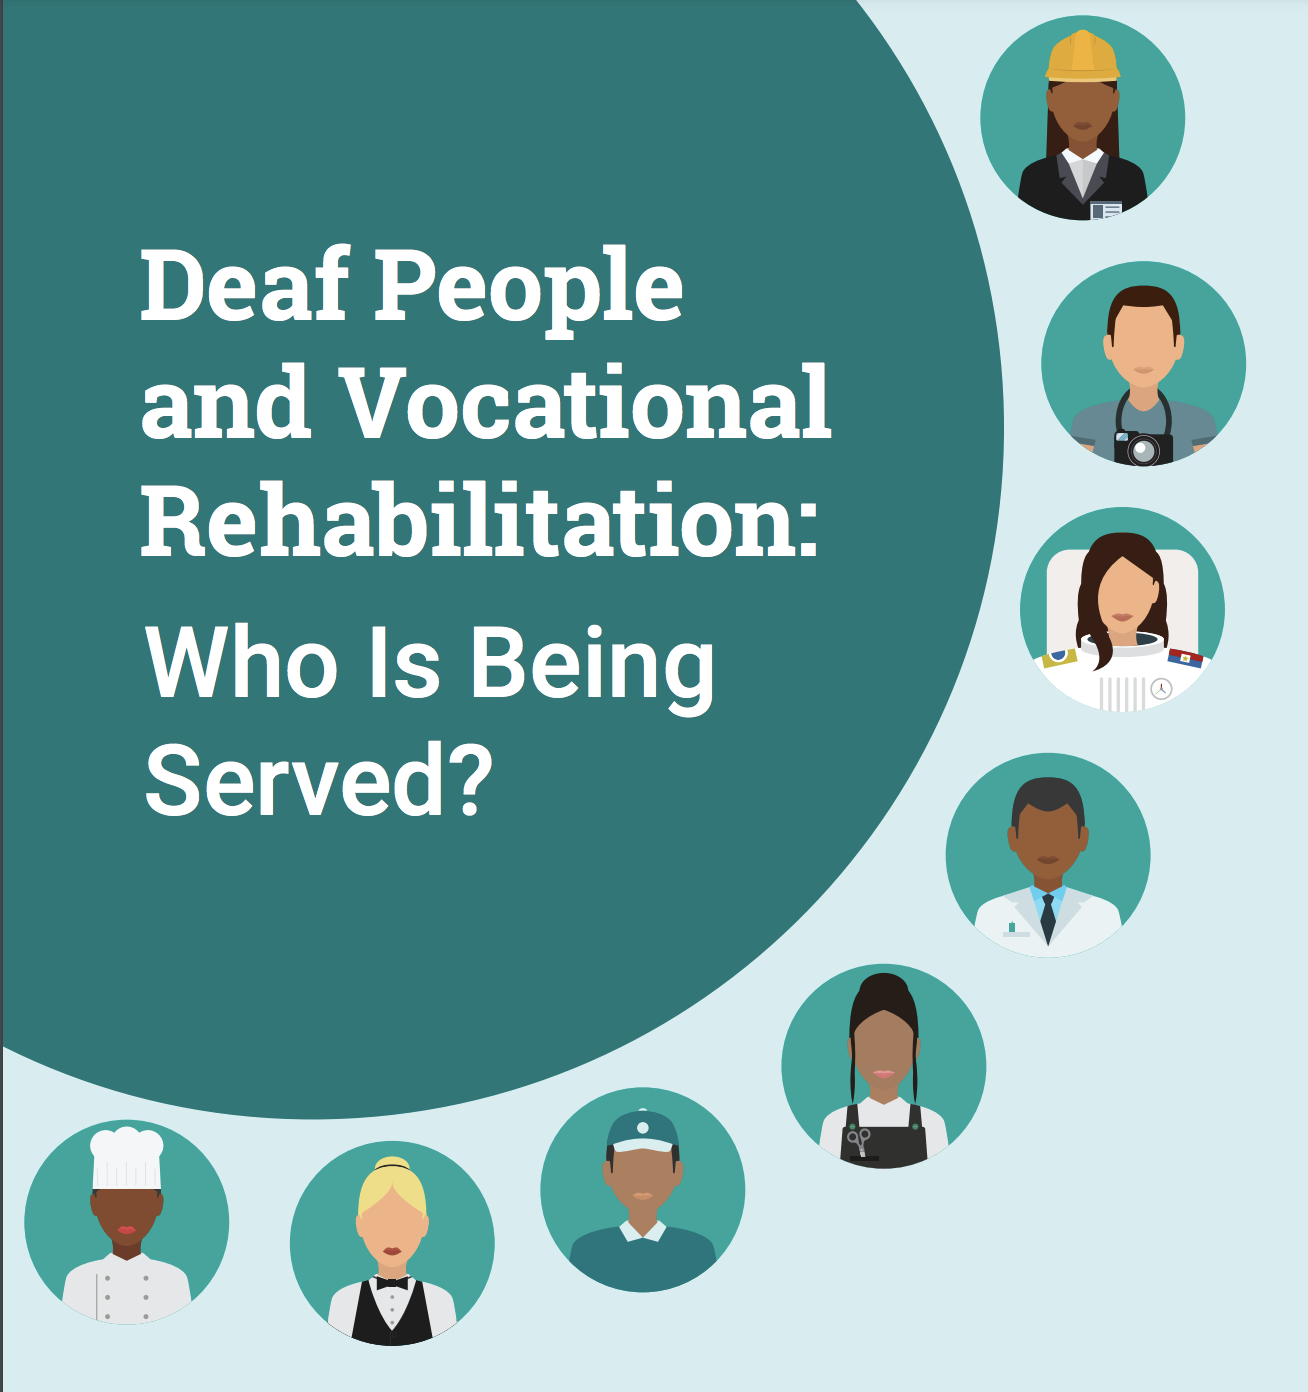 The image is a poster titled "Deaf People and Vocational Rehabilitation: Who Is Being Served?" There is also a clipart of multiple variety people.